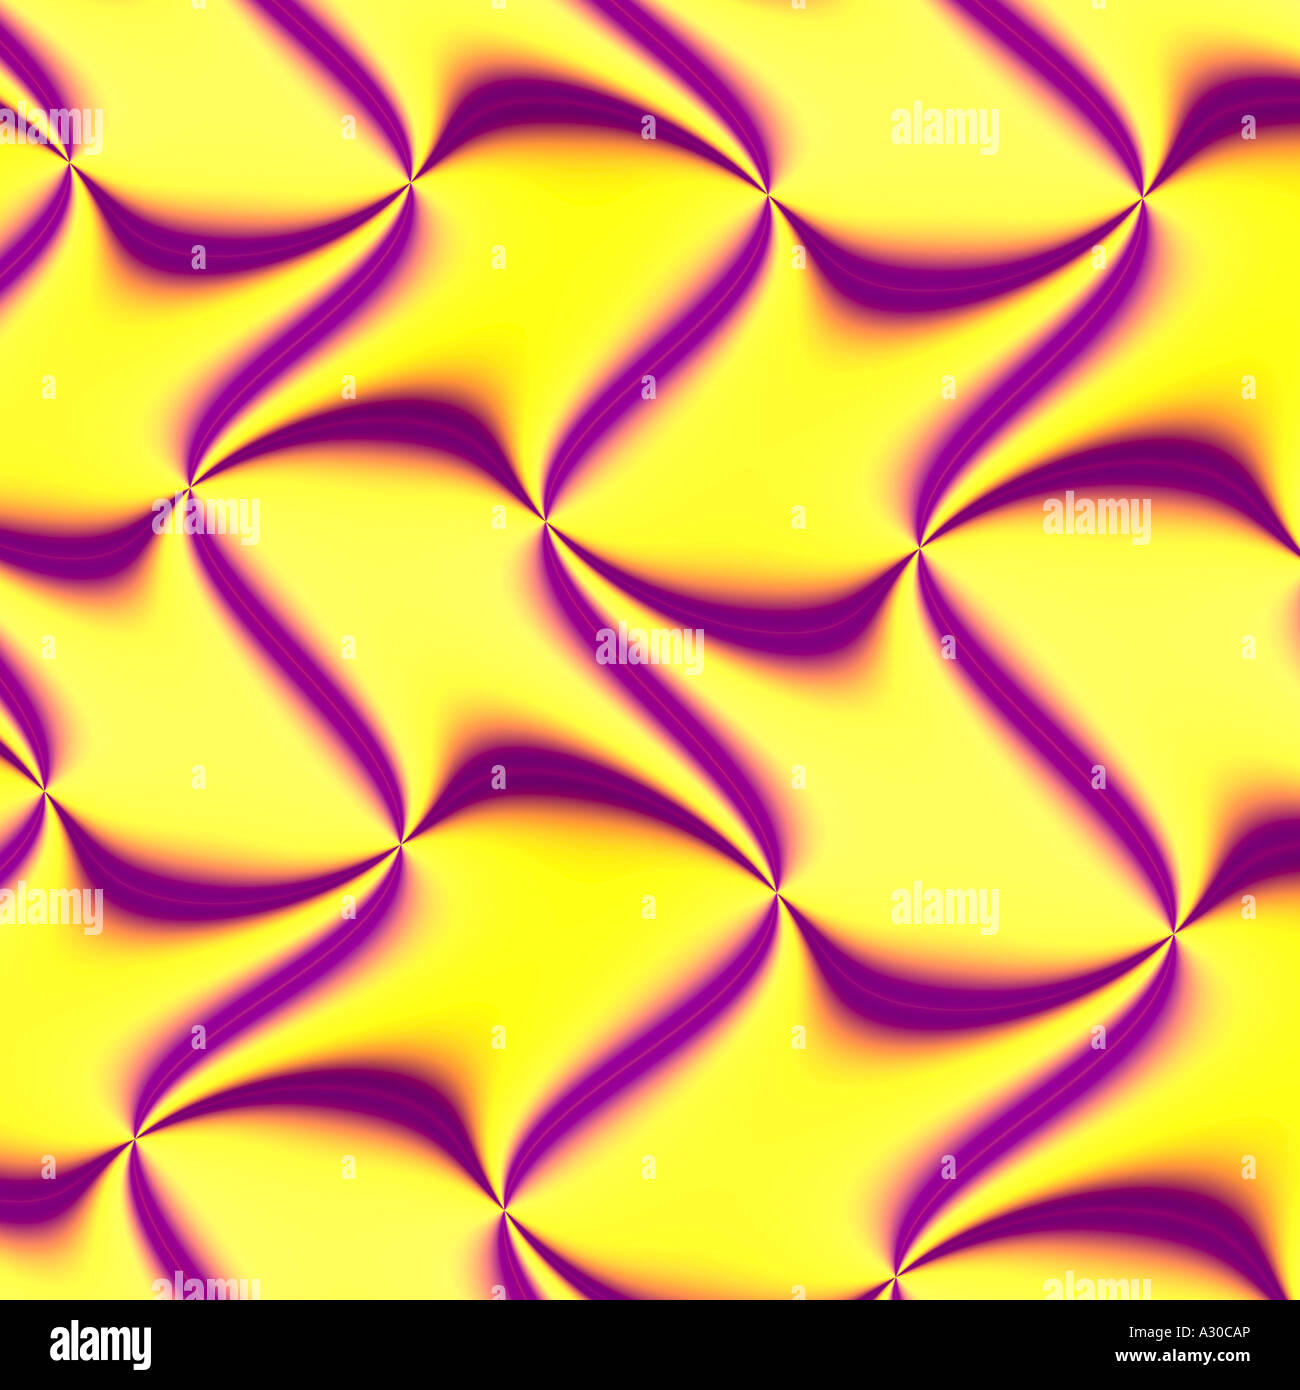 Computer generated fractal image concept ecology energy illusion macro pink yellow mesh spectral tropical Stock Photo